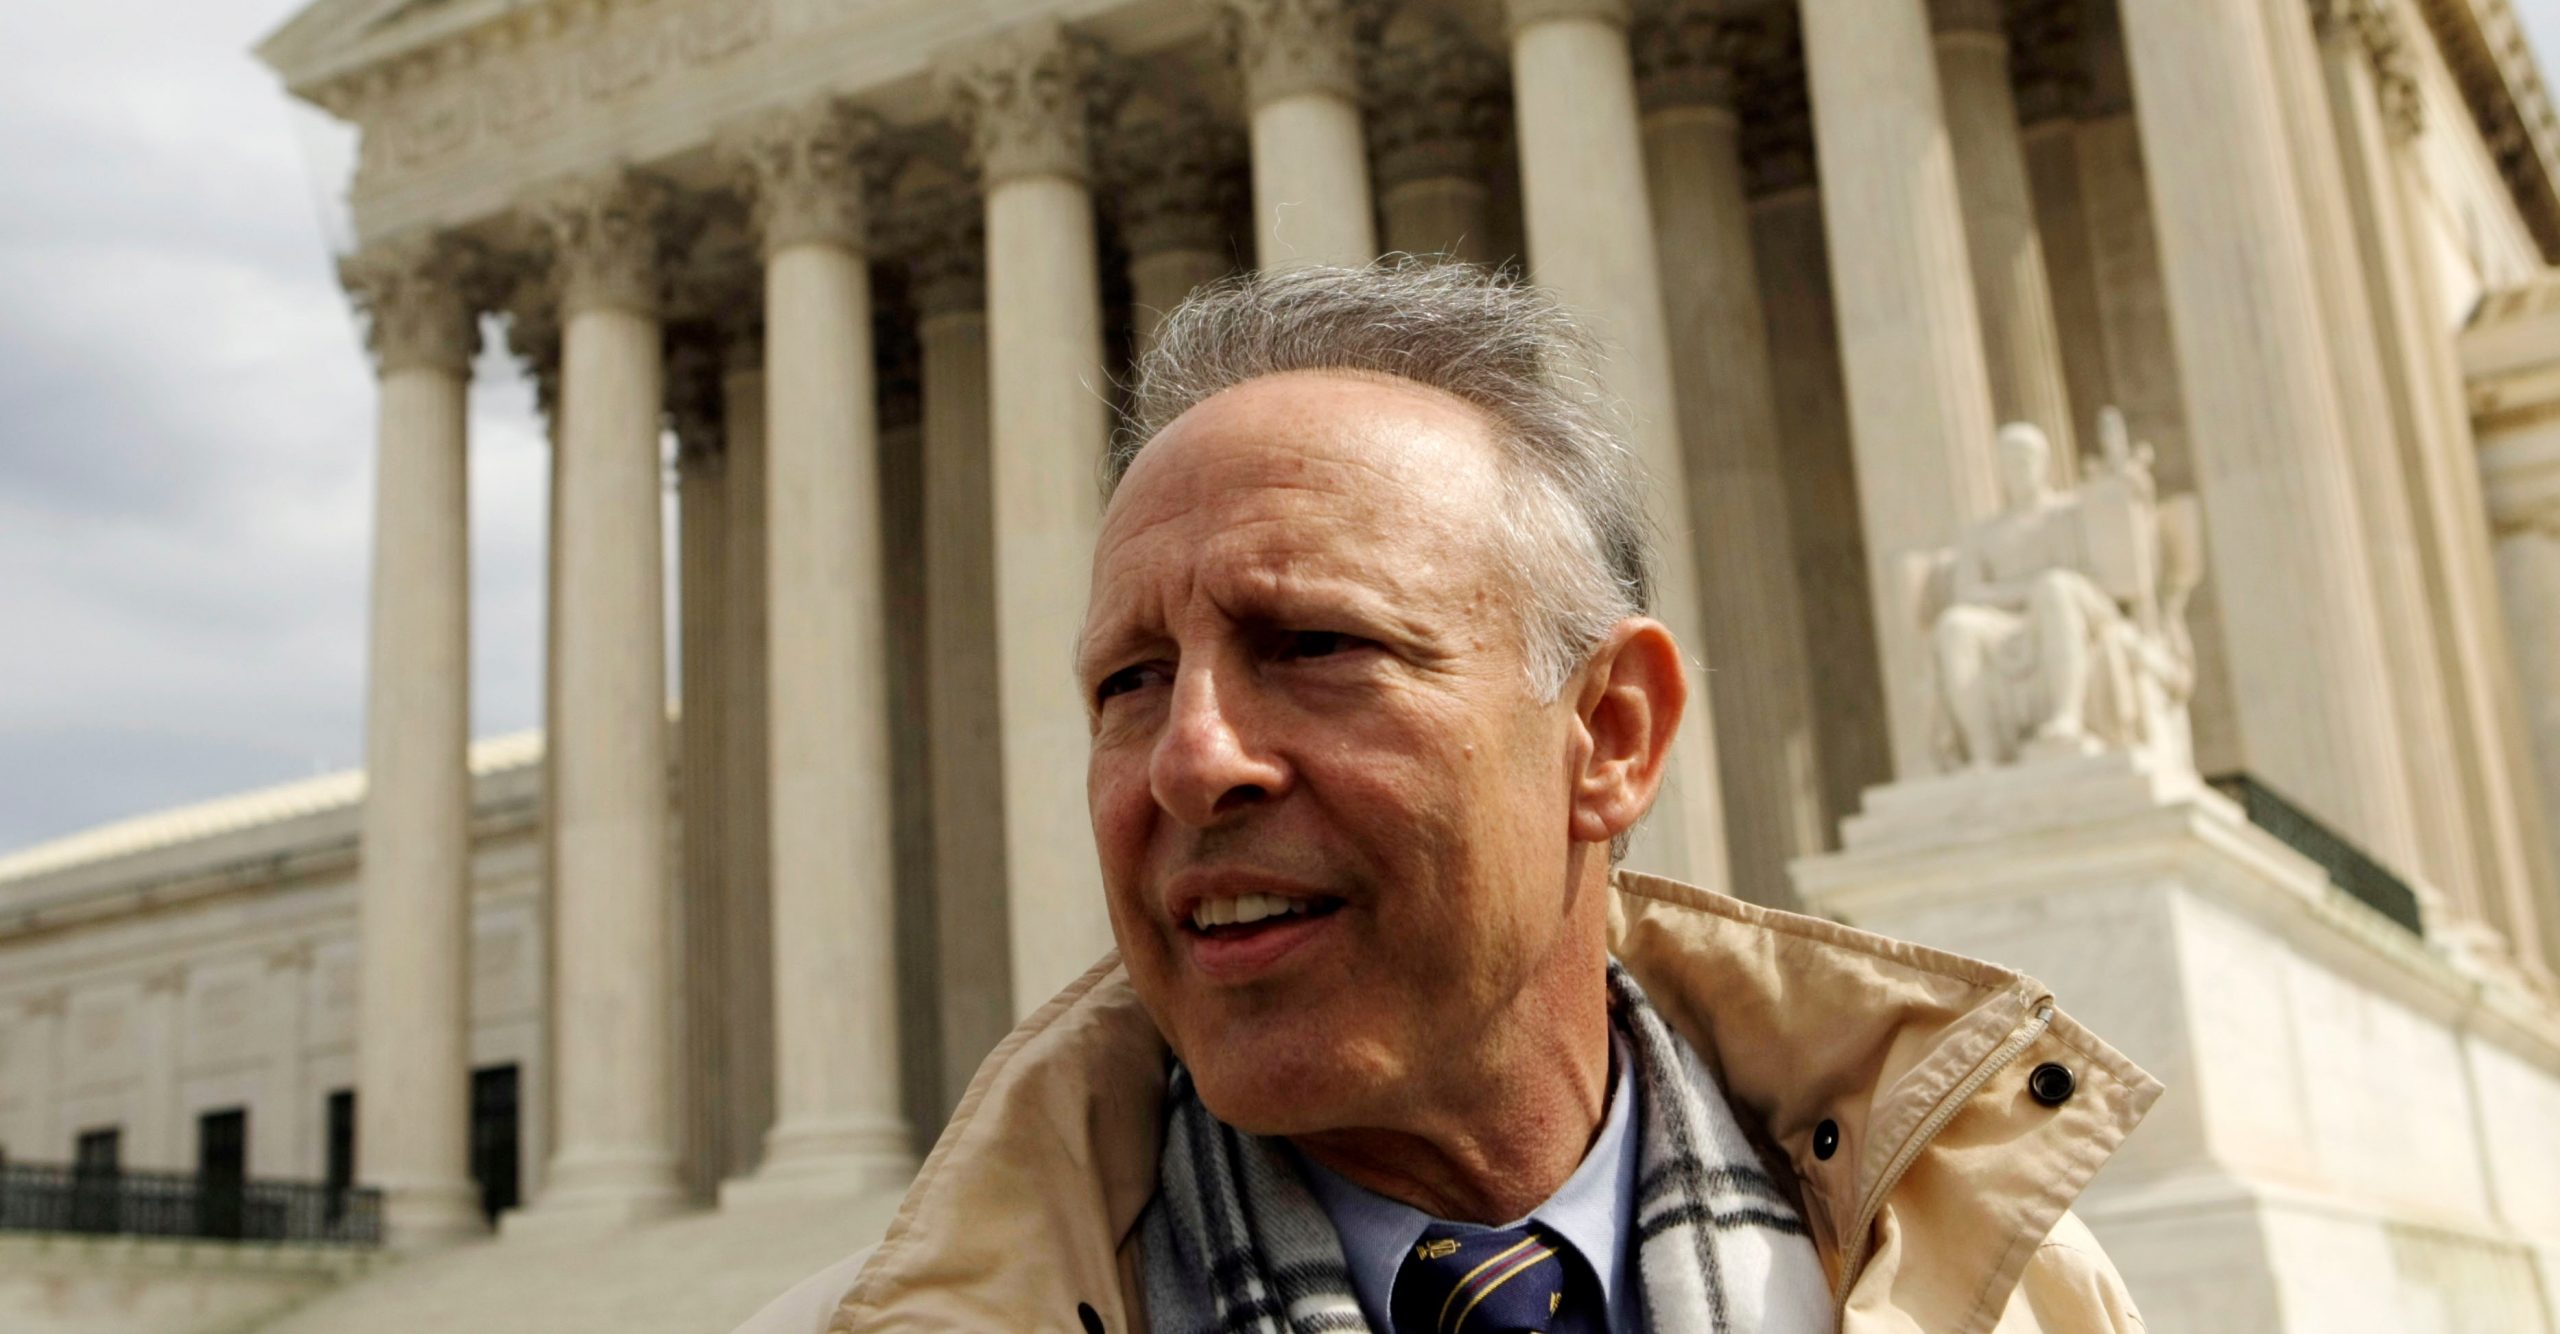 Dick Heller's 2008 Supreme Court Case Was Just the Beginning of